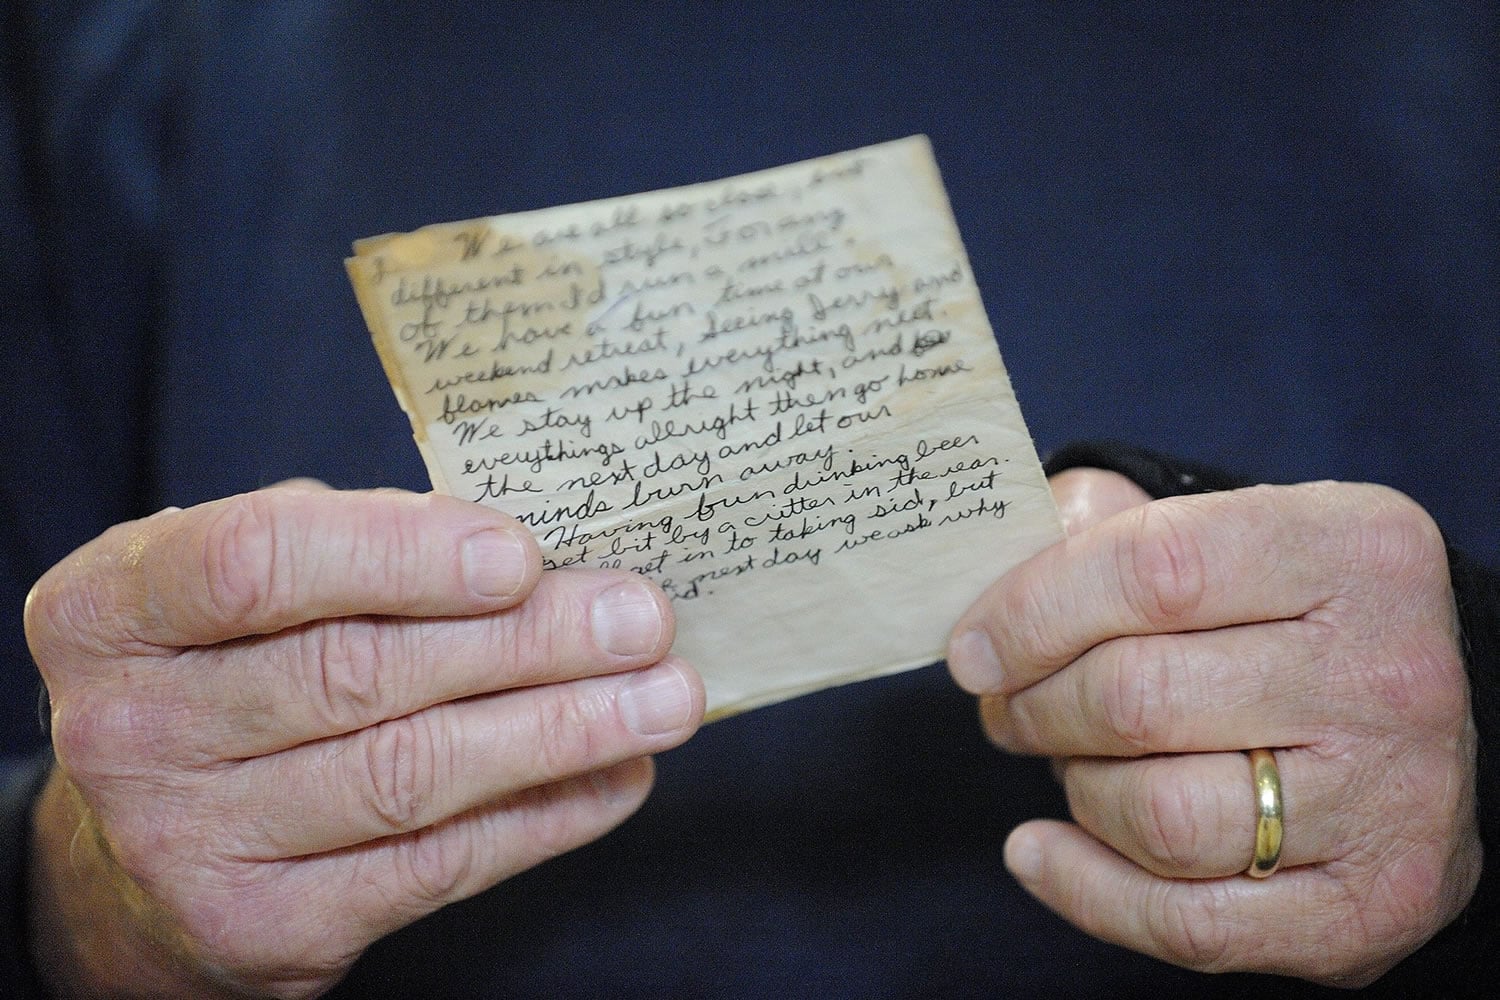 Frank Hoetker holds a letter written by his son, Darby, who died from a drug overdose. Darby's struggle with drug addiction is documented in the letters he wrote.